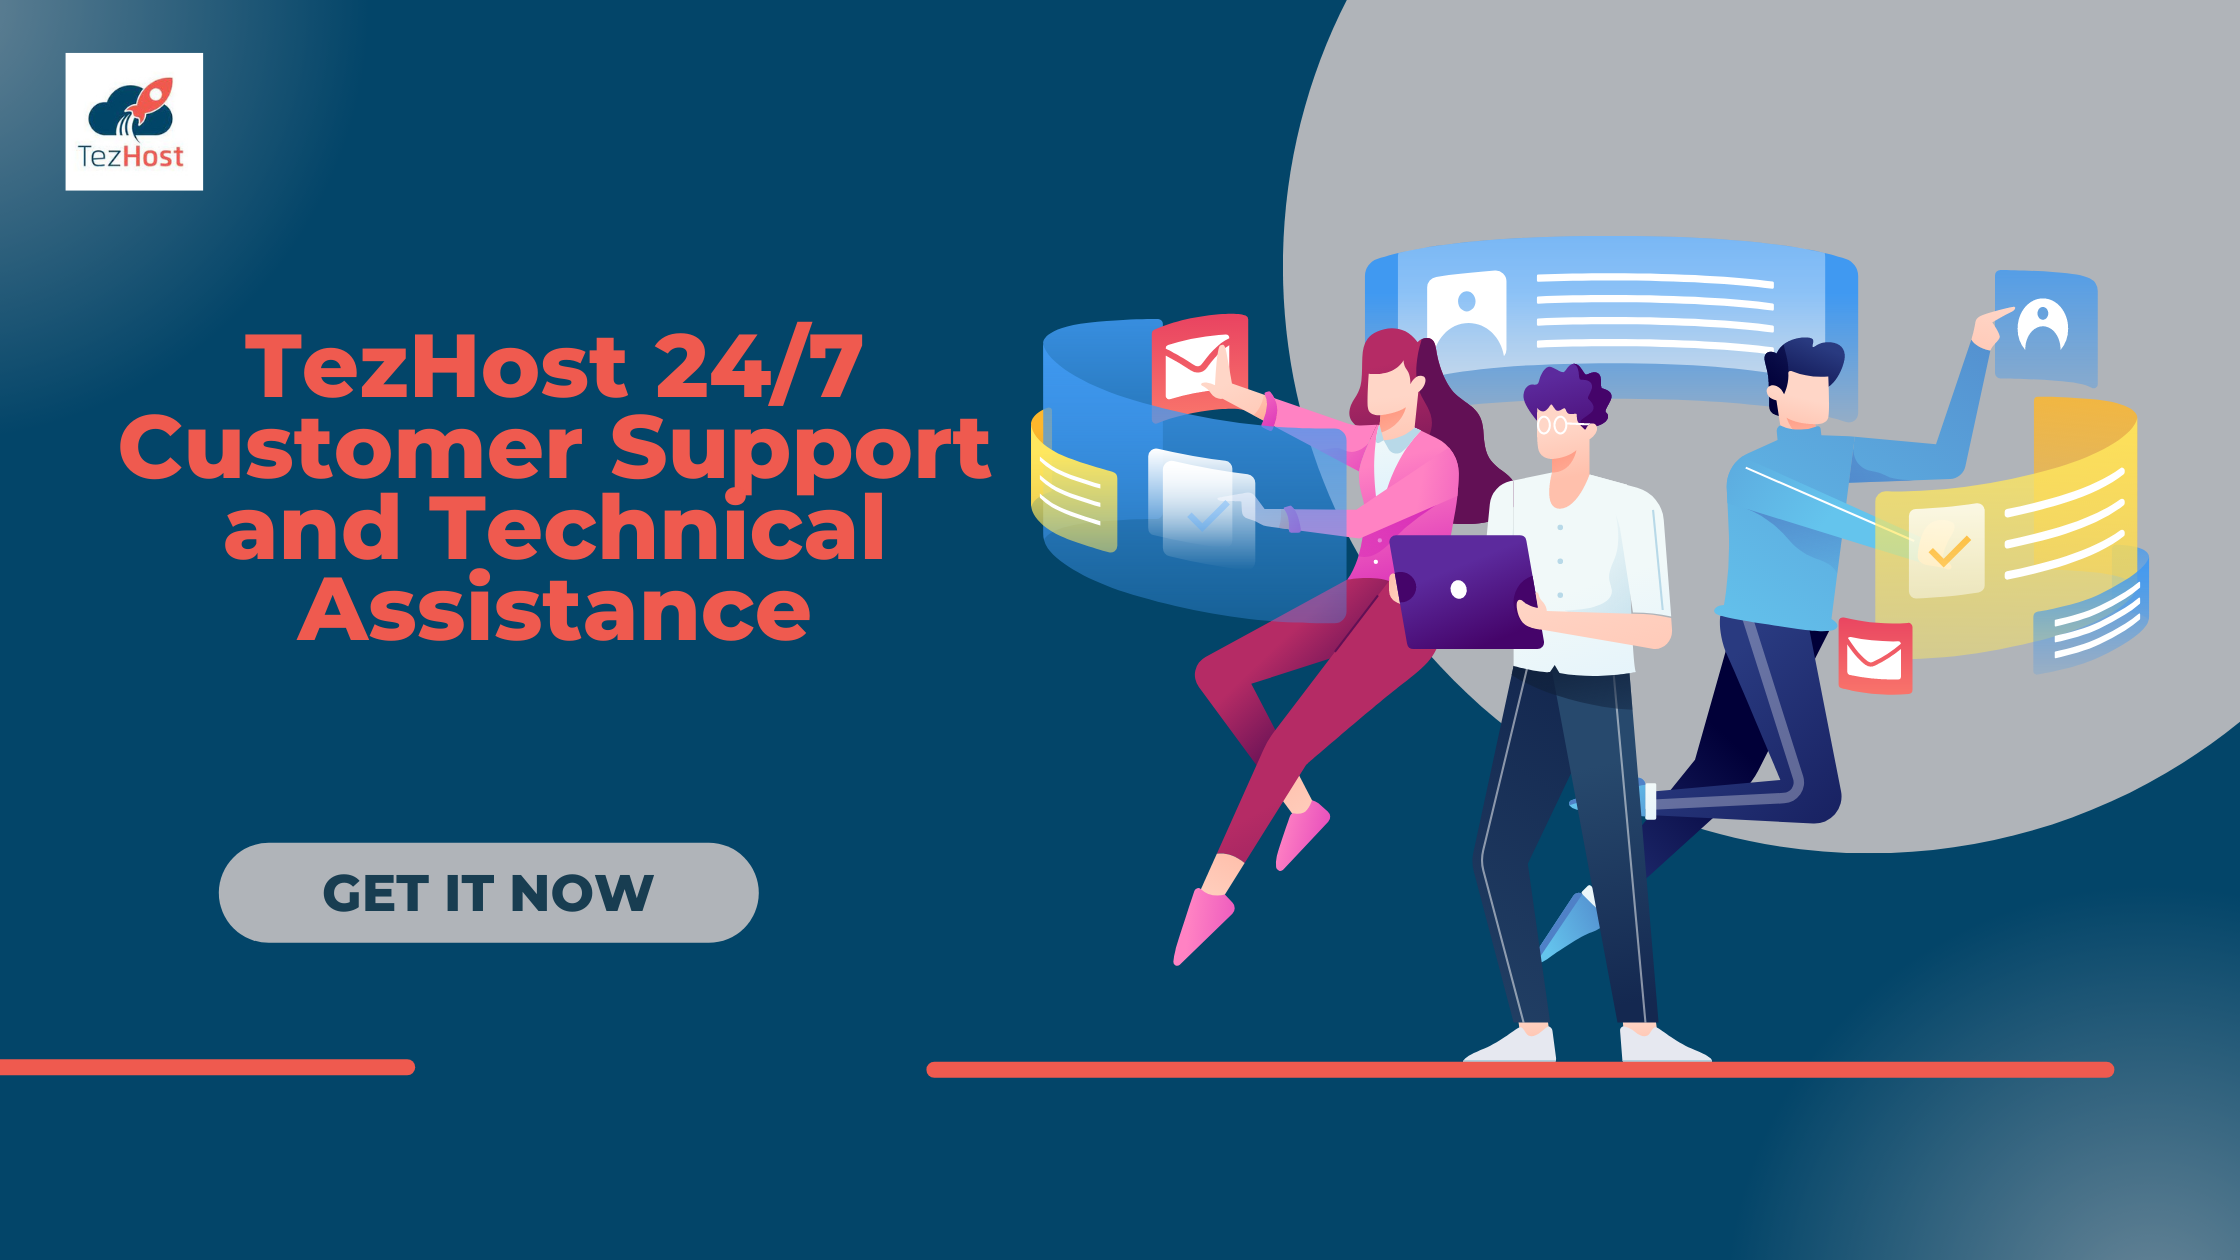 The Benefits of TezHost 24/7 Customer Support and Technical Assistance